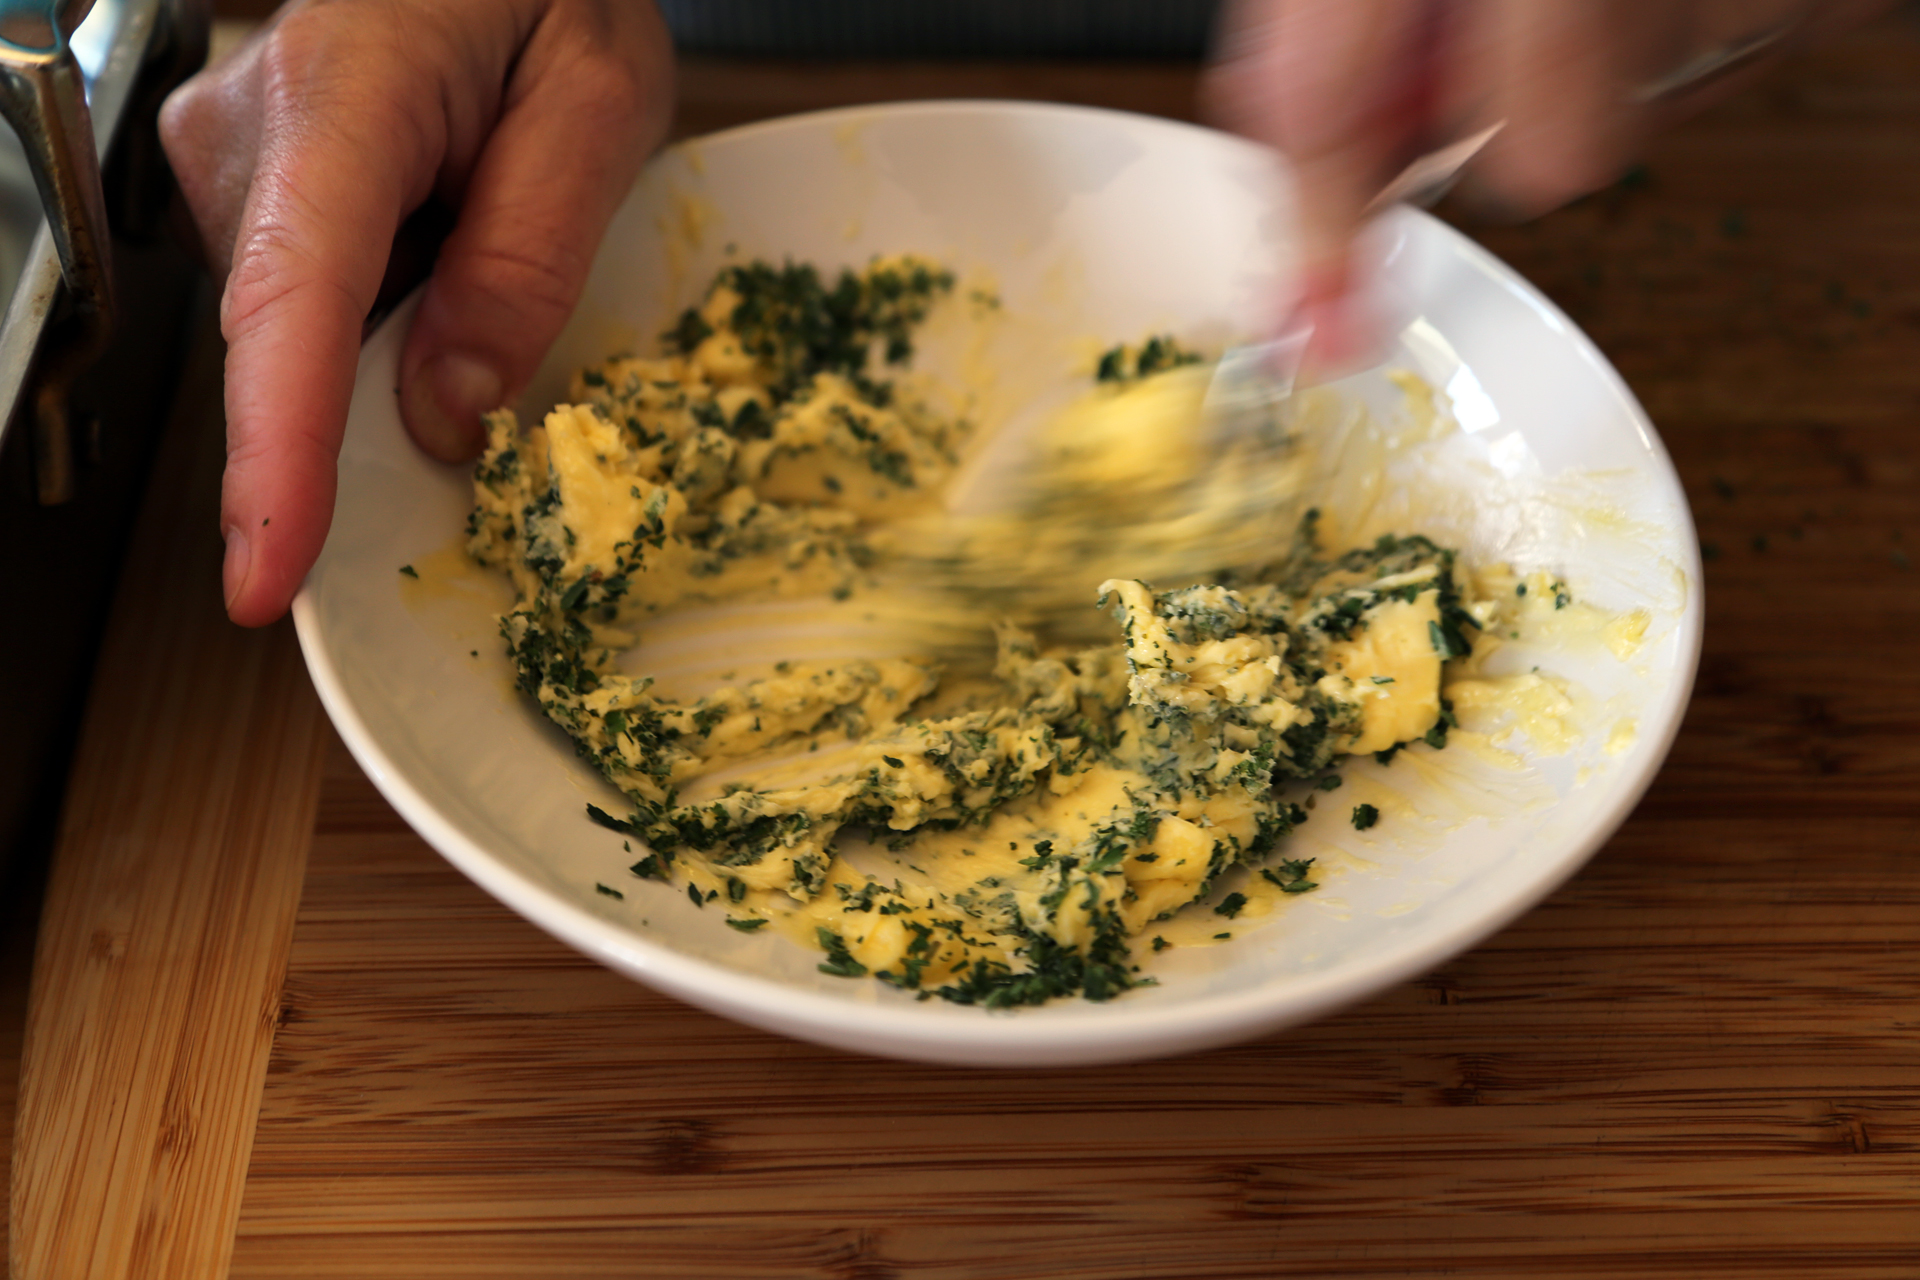 In a bowl, stir together the butter, thyme, and sage until well combined.